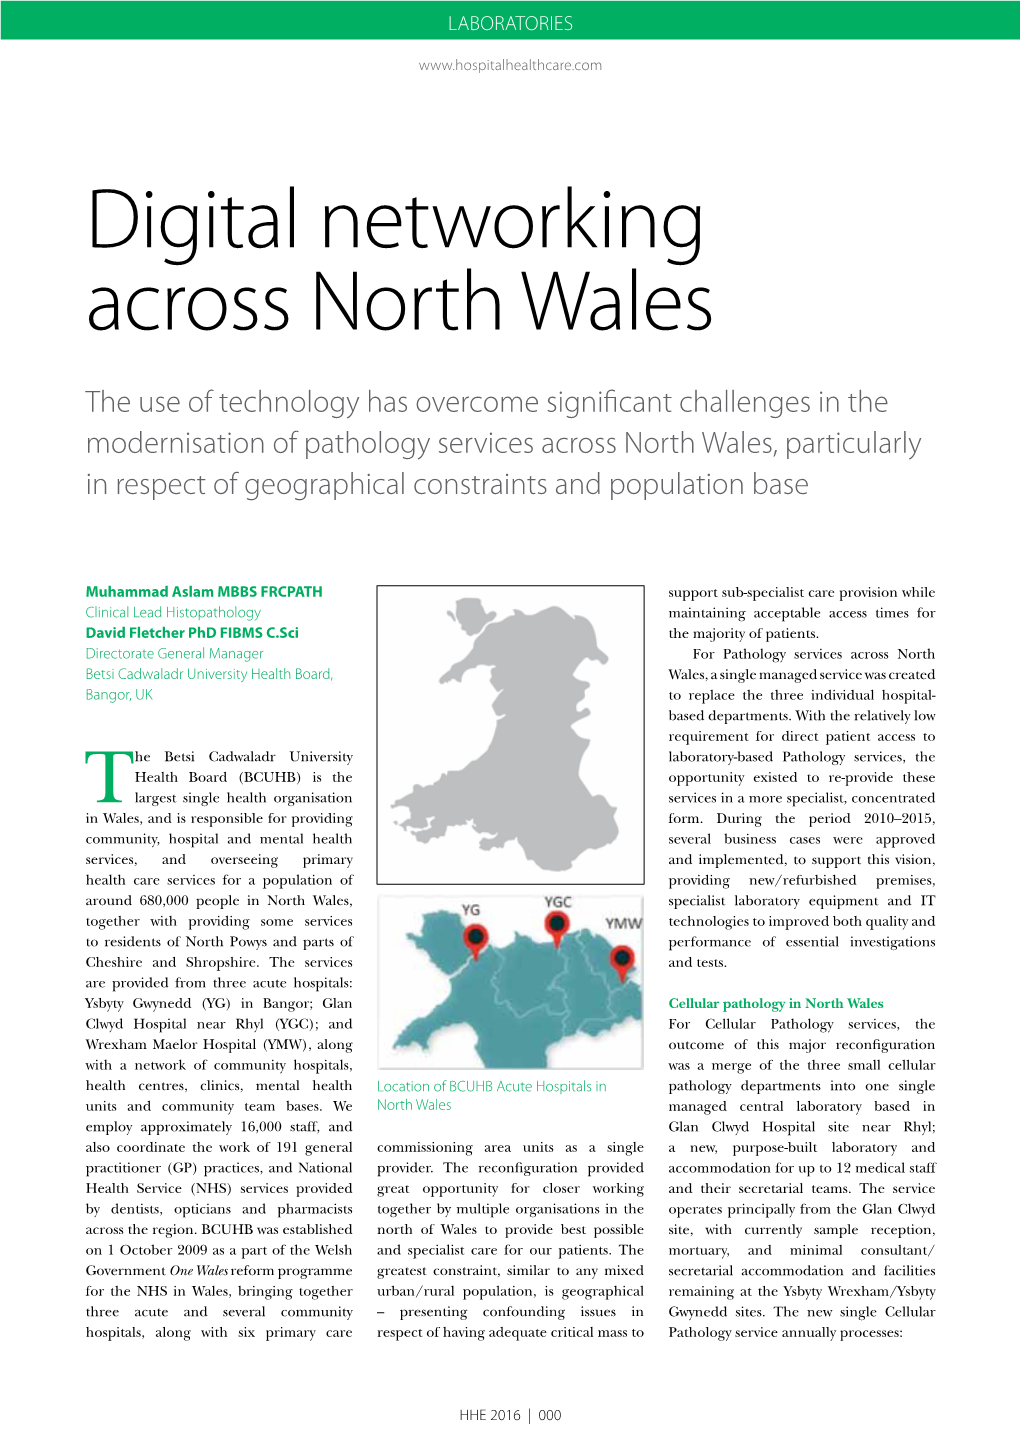 Digital Networking Across North Wales